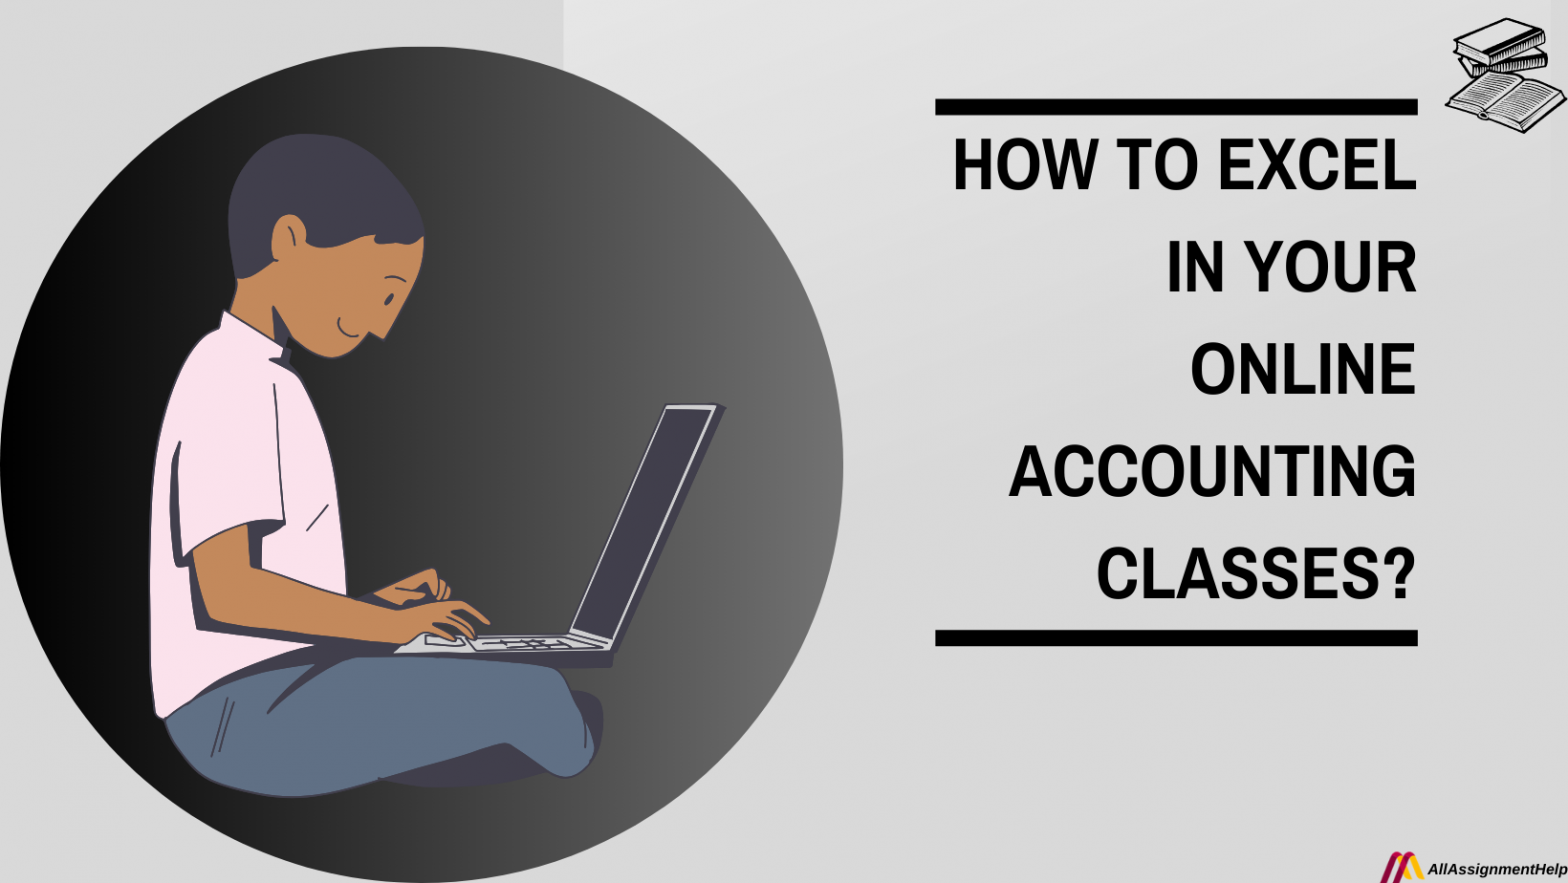 How To Excel In Your Online Accounting Classes?